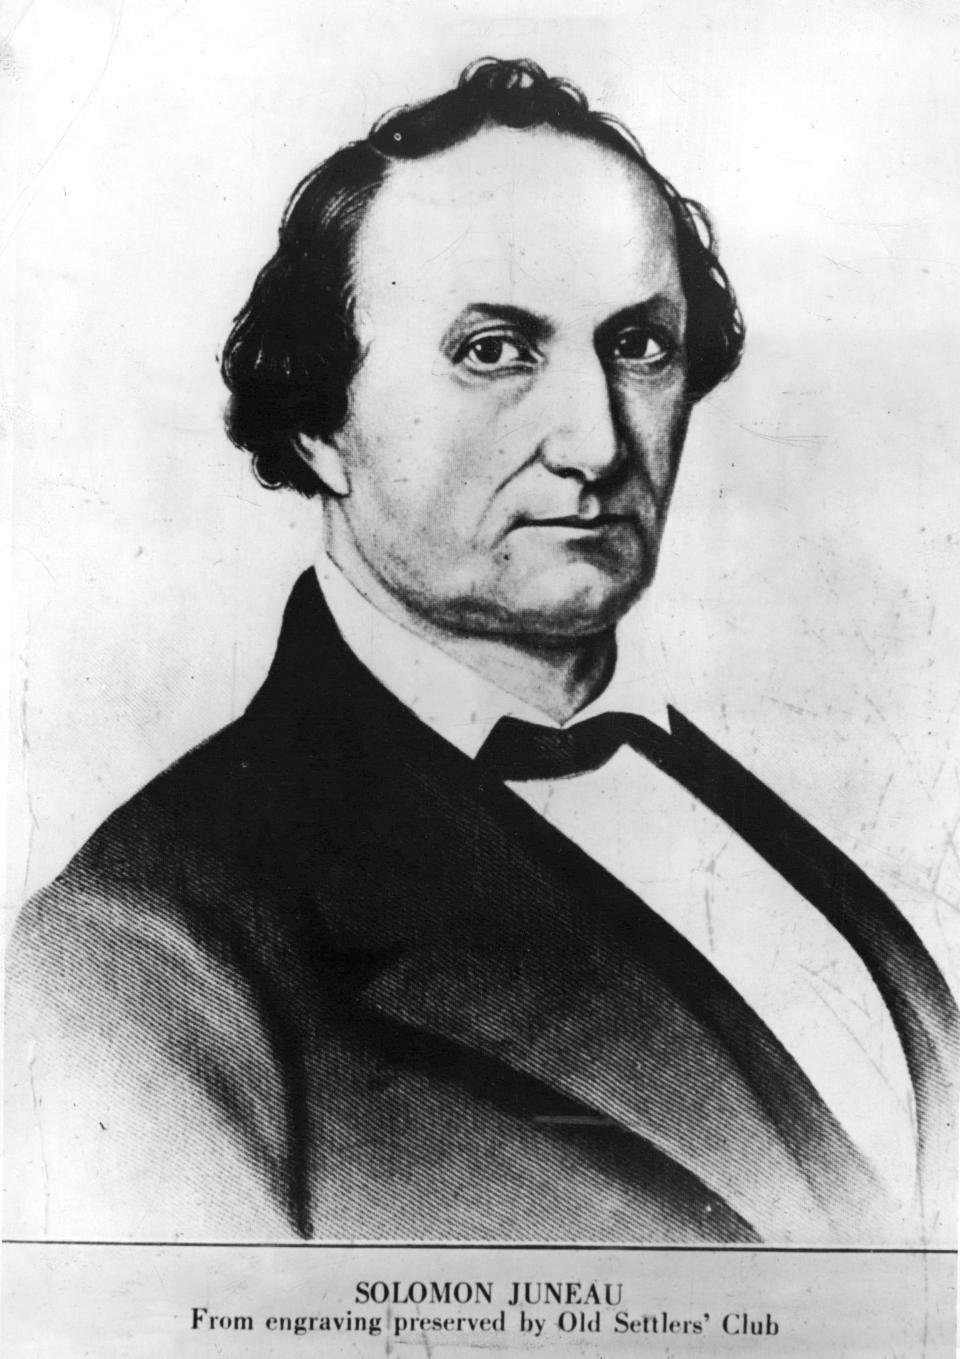 Solomon Juneau came to Milwaukee in 1818. He was Milwaukee's first mayor and founded the Milwaukee Sentinel (a forerunner of the Journal Sentinel) in 1837.